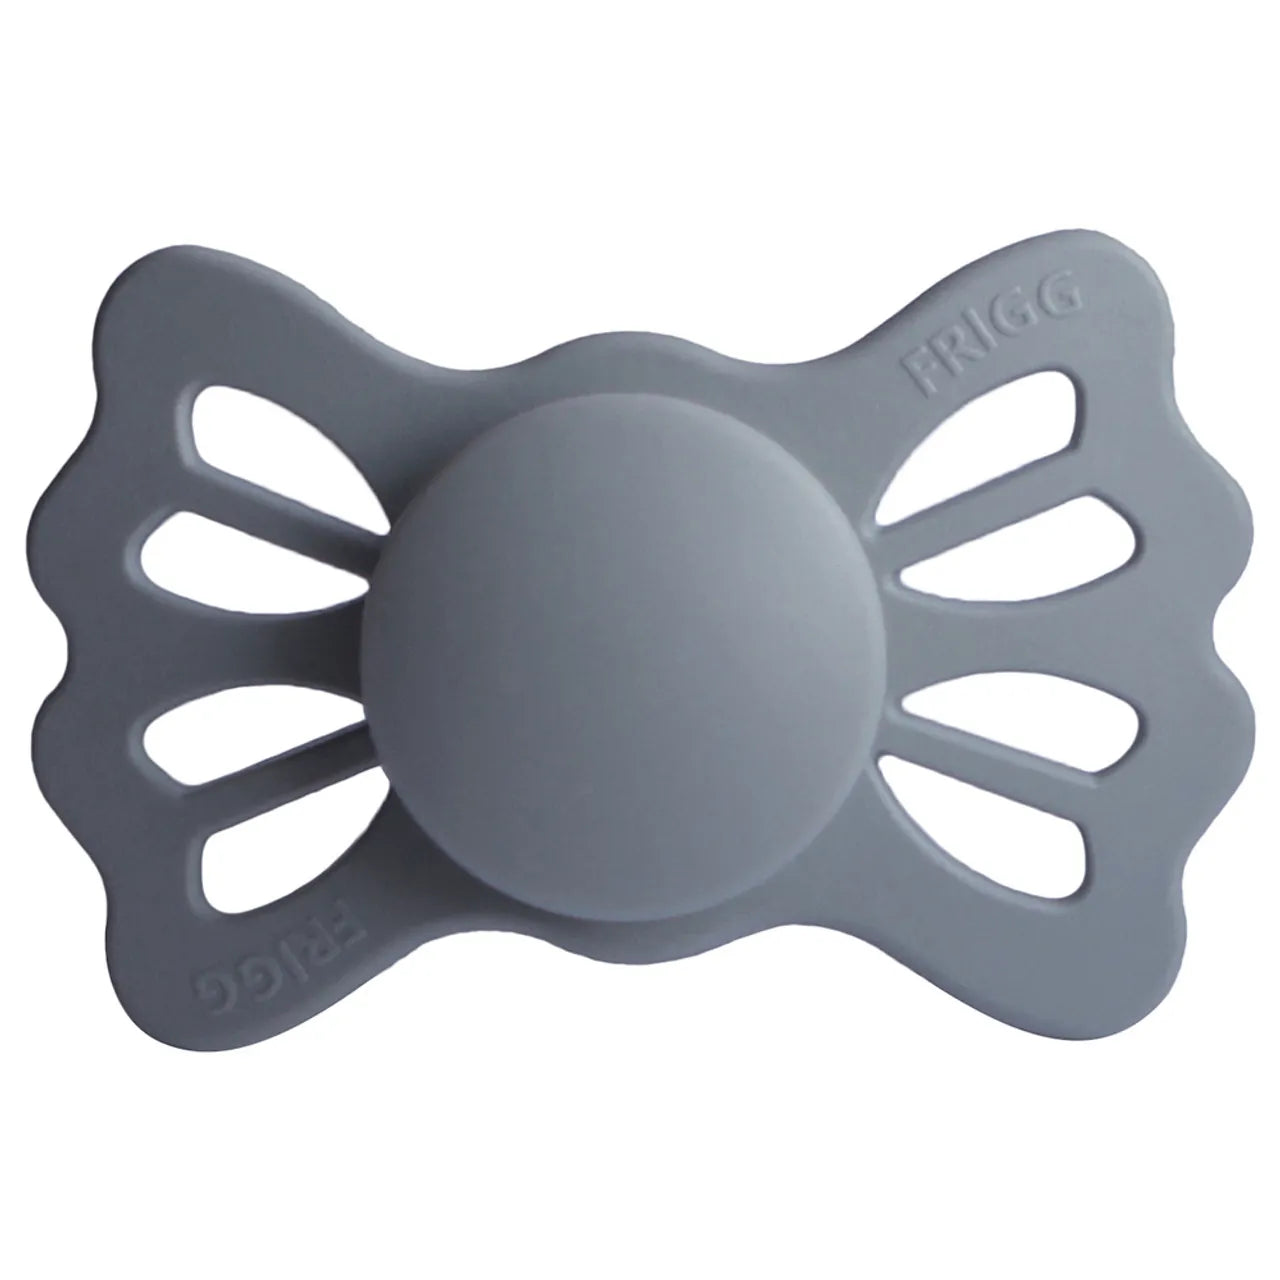 Frigg Lucky Symmetrical Silicone Baby Pacifier 6M-18M, Great Gray - Size 2 - Laadlee